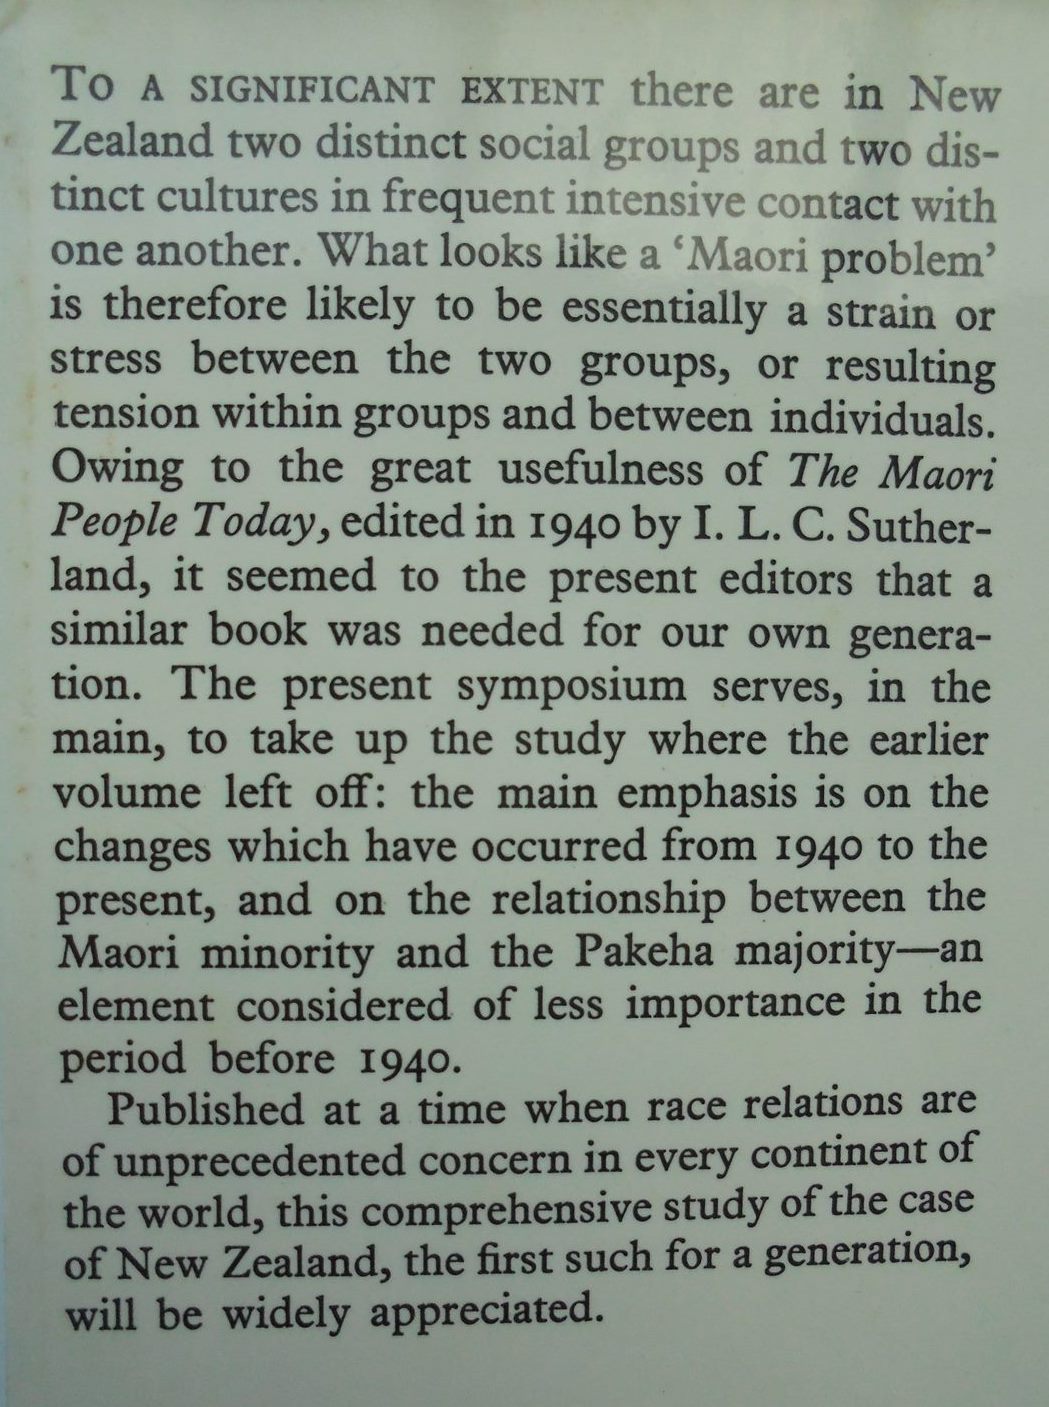 The Maori People in the Nineteen-sixties: A Symposium. by Eric Schwimmer.